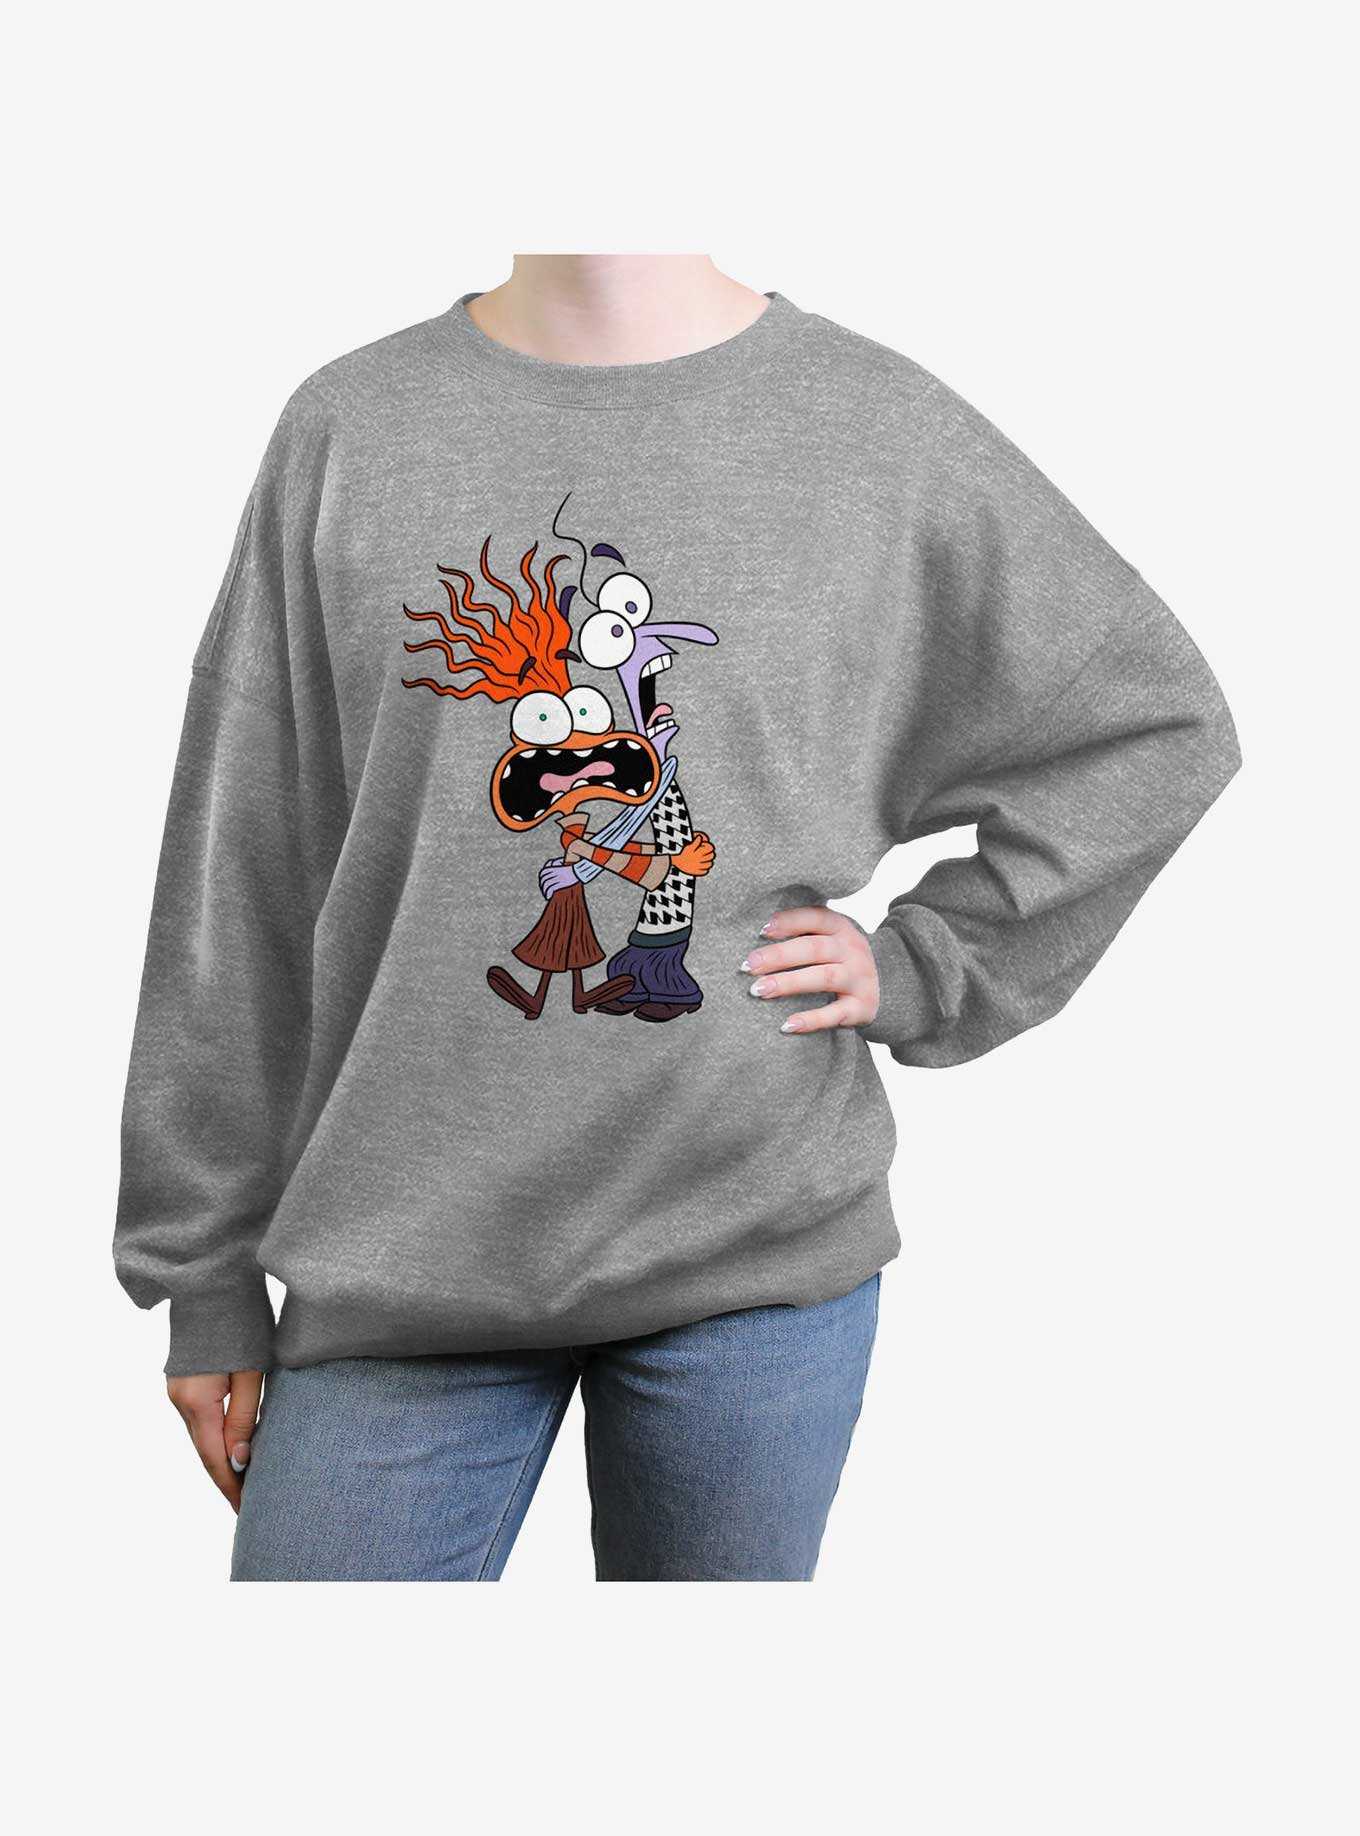 Disney Pixar Inside Out 2 Anxiety And Fear Girls Oversized Sweatshirt, , hi-res